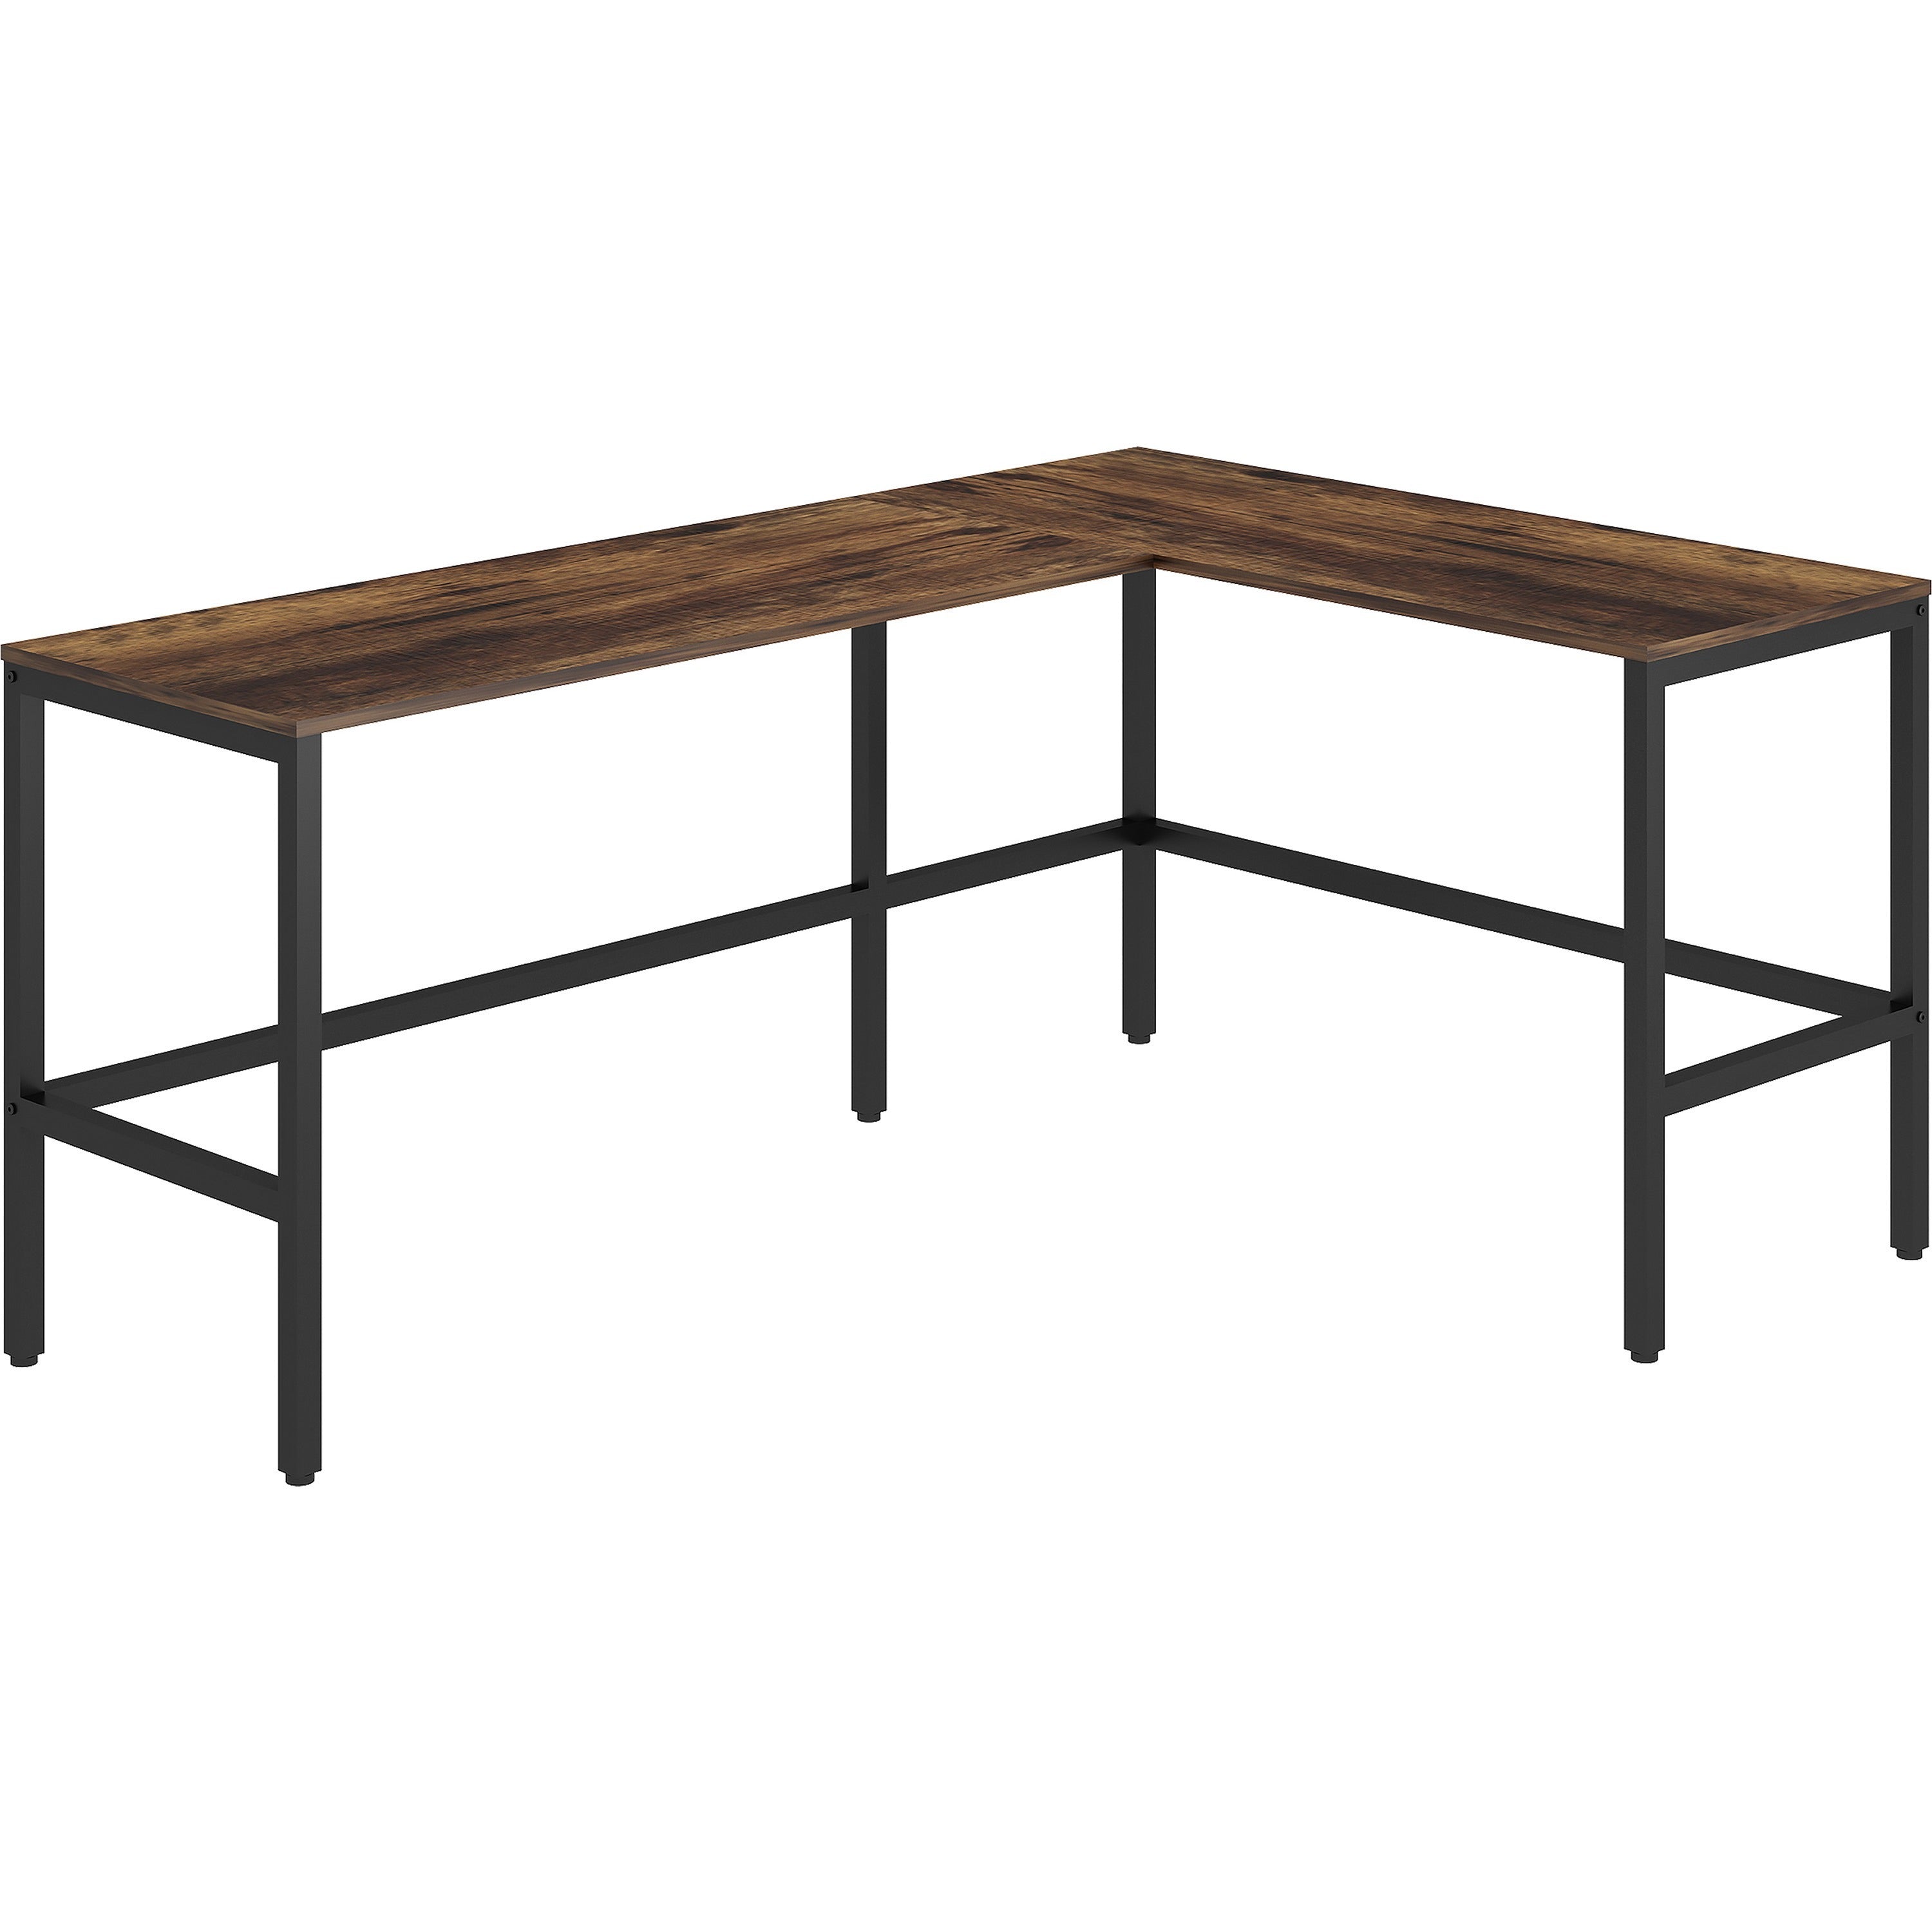 NuSparc L-Shaped Metal Frame Desk - For - Table TopVintage Oak L-shaped, Black Top - Contemporary Style - 200 lb Capacity x 67" Table Top Width x 47.20" Table Top Depth x 1" Table Top Thickness - 29.20" Height - Assembly Required - High Pressure Lami - 1